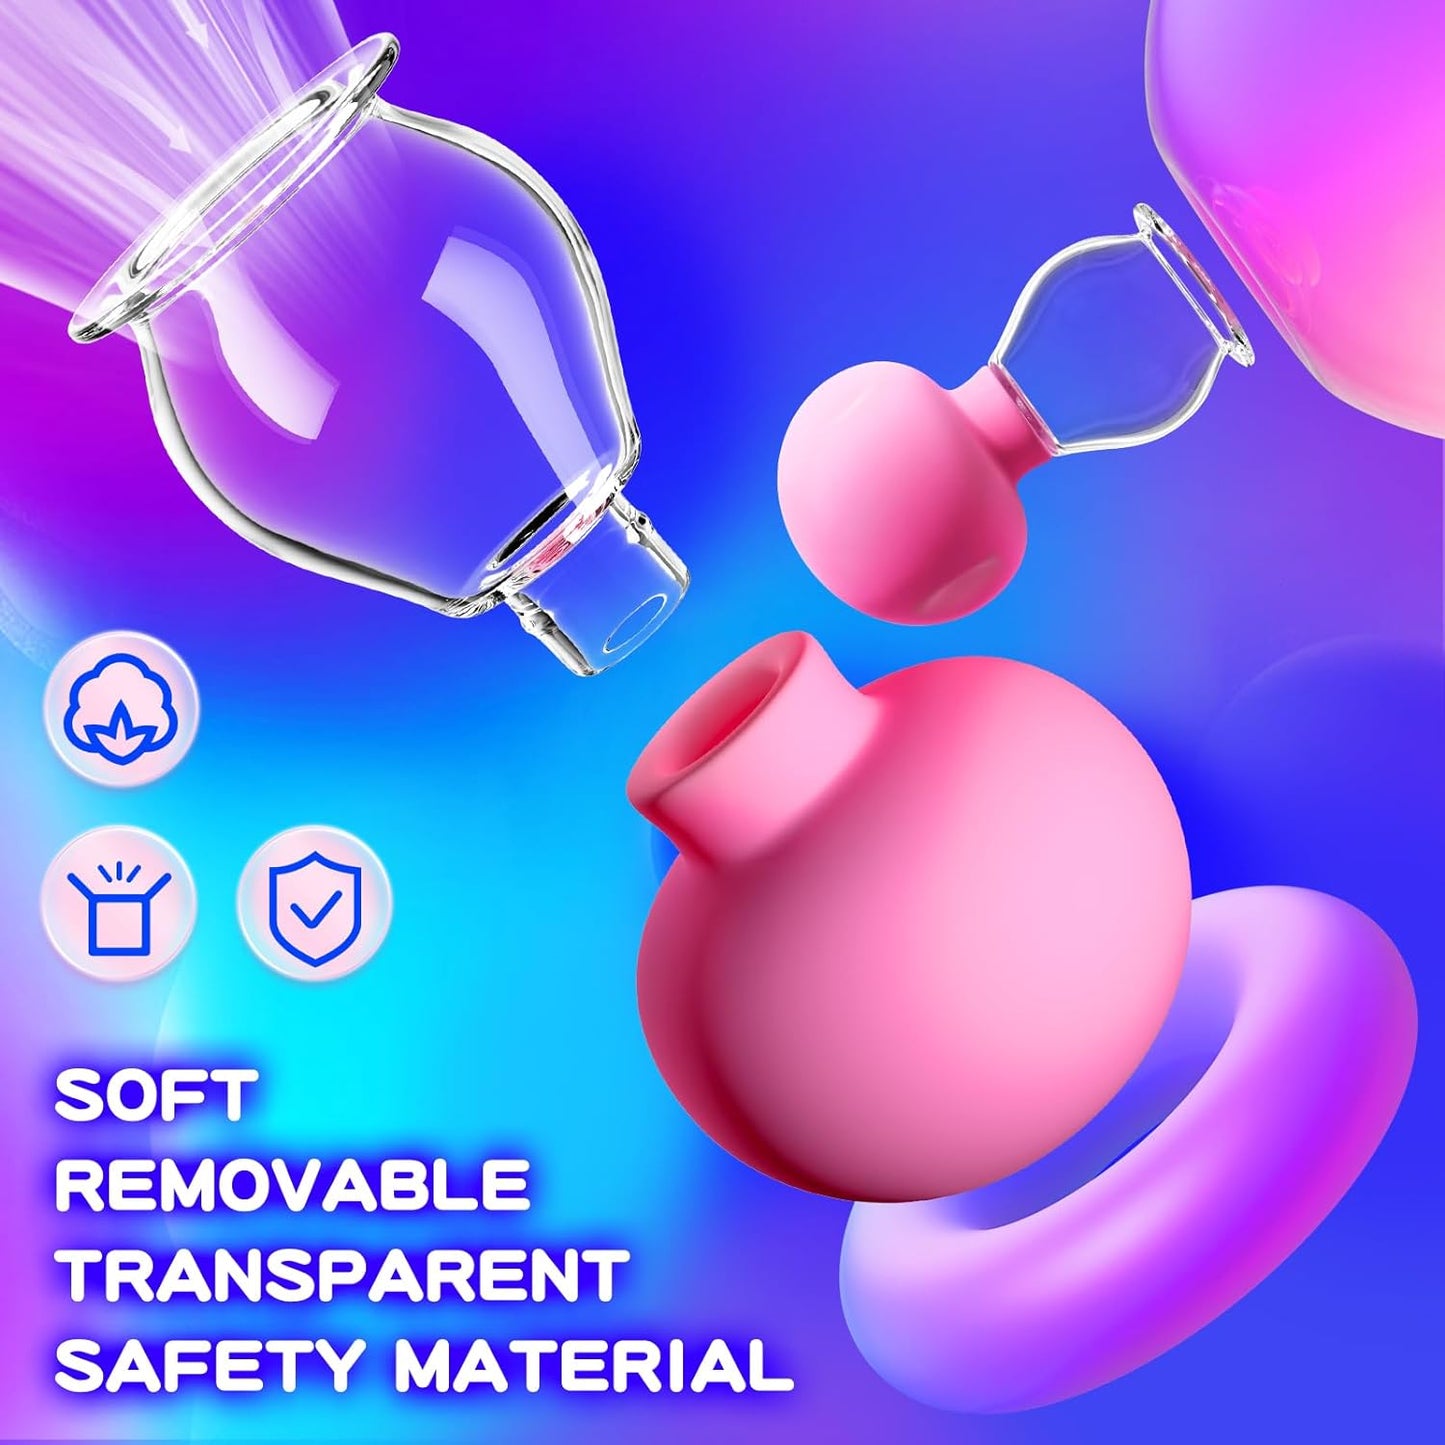 Nipple Sucker Adult Sex Toys - 1 Pair Nipple Toys Stimulator Women Sex Toys with Powerful Manual Suction BDSM Foreplay Flirting Nipple Pump Toy, Nipple Corrector for Inverted Flat Shy Nipples